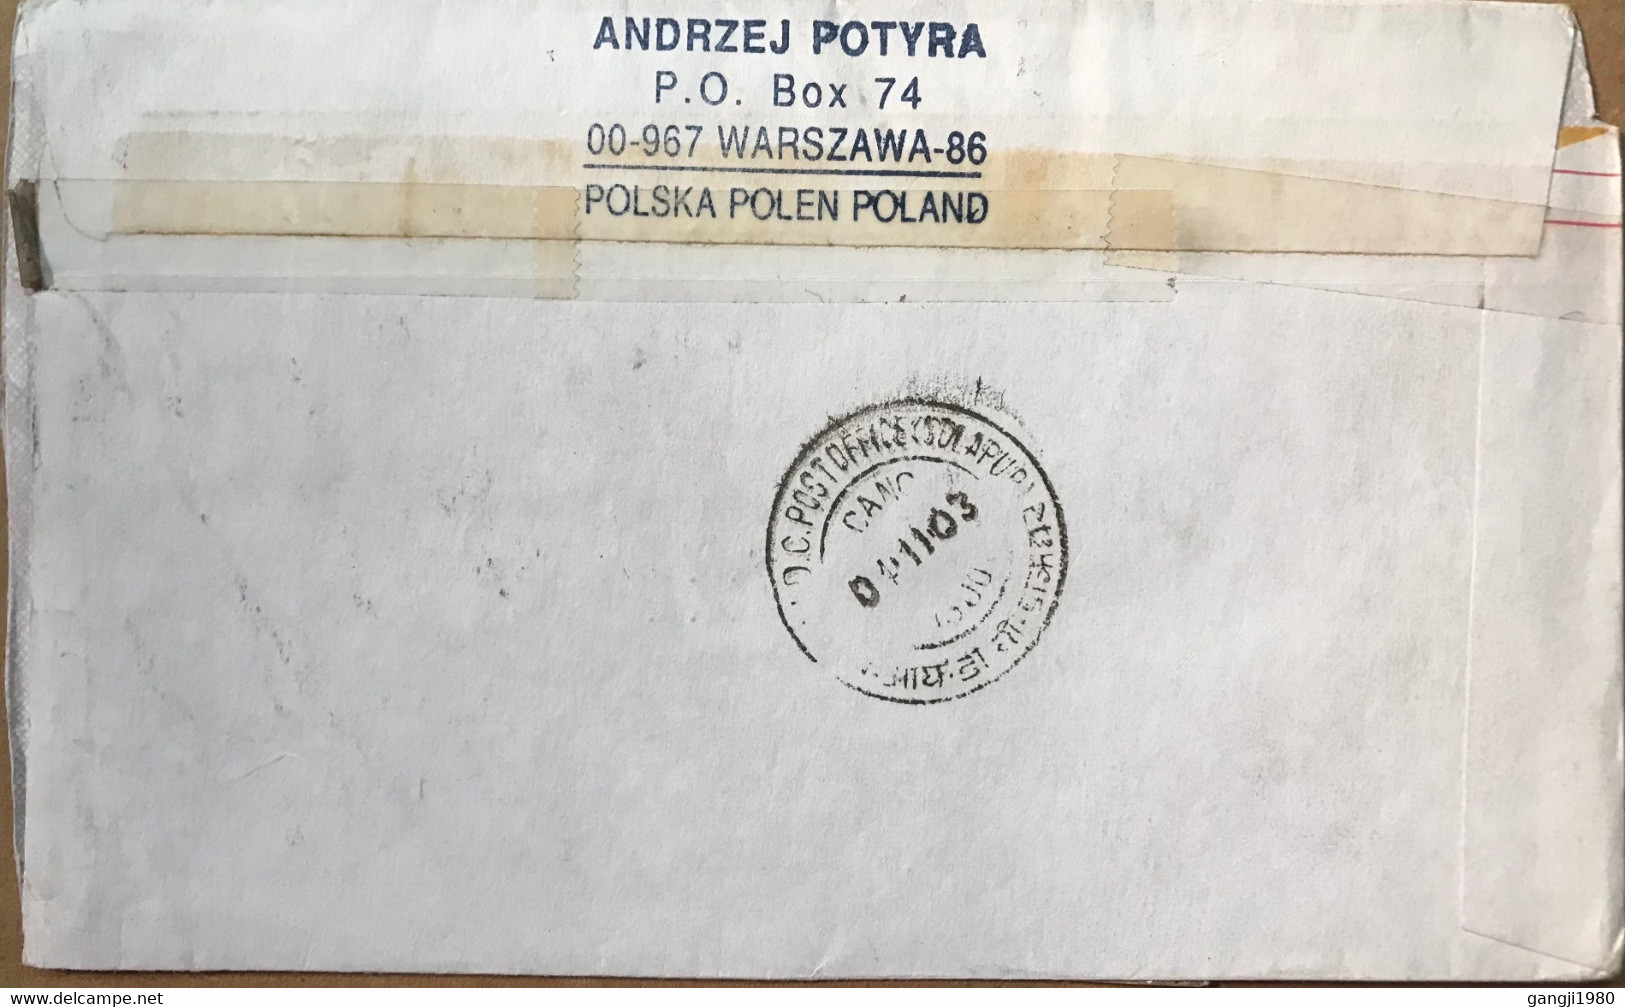 POLAND -2003, COVER USED TO INDIA, REGISTER AIRMAIL, TORUN MULTI 9 STAMP, CATCH BEE, MONUMENT, WORRIER, WARSZAWA CITY CA - Covers & Documents